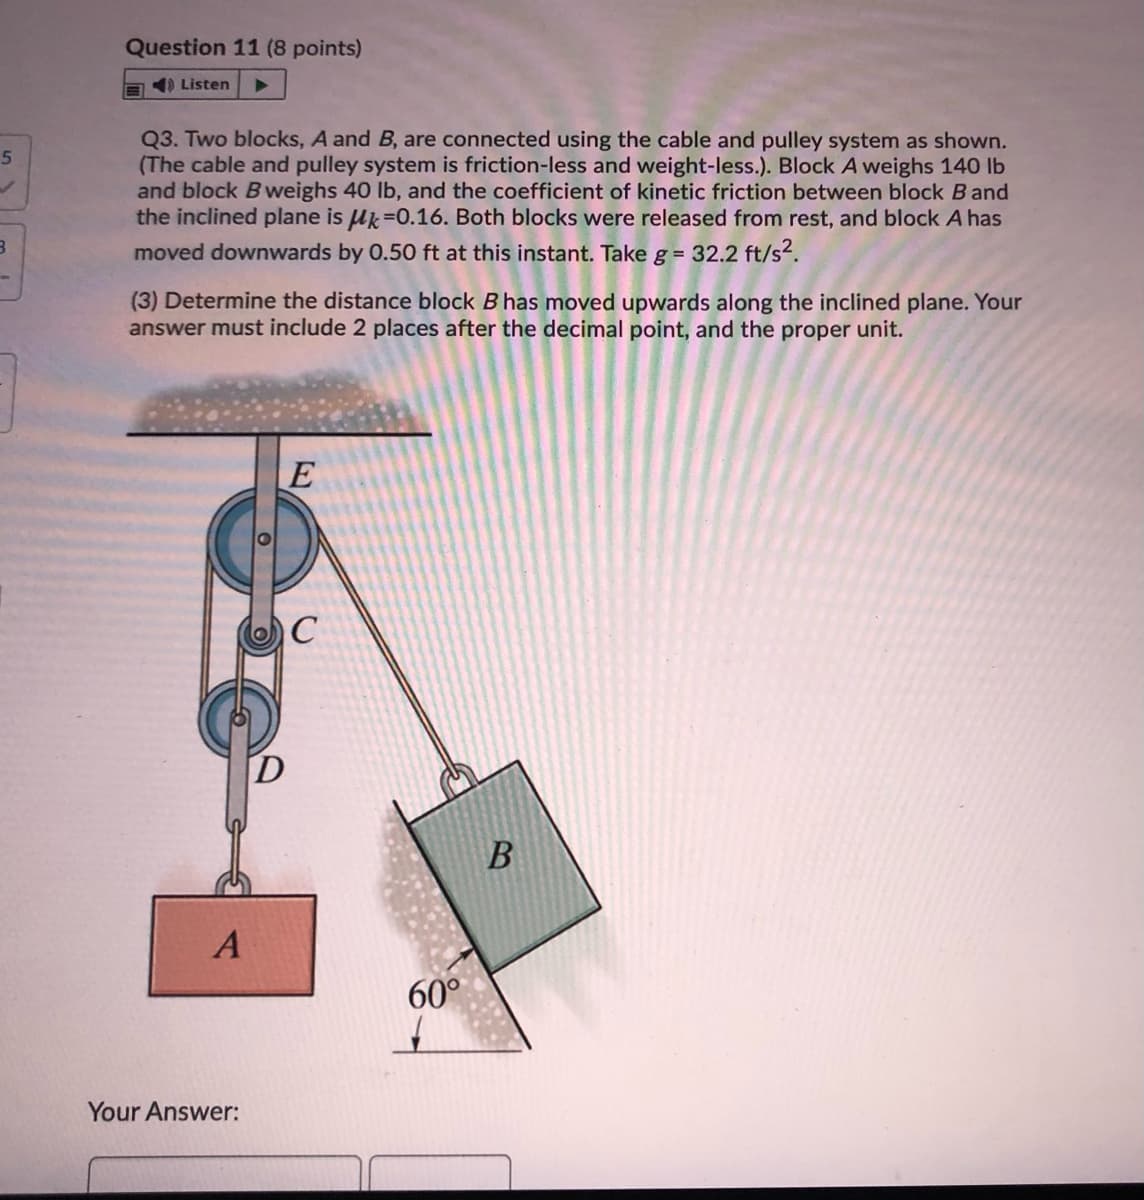 Question 11 (8 points)
E ) Listen
Q3. Two blocks, A and B, are connected using the cable and pulley system as shown.
(The cable and pulley system is friction-less and weight-less.). Block A weighs 140 lb
and block Bweighs 40 lb, and the coefficient of kinetic friction between block B and
the inclined plane is uk=0.16. Both blocks were released from rest, and block A has
moved downwards by 0.50 ft at this instant. Take g = 32.2 ft/s?.
(3) Determine the distance block B has moved upwards along the inclined plane. Your
answer must include 2 places after the decimal point, and the proper unit.
C
B
60°
Your Answer:
